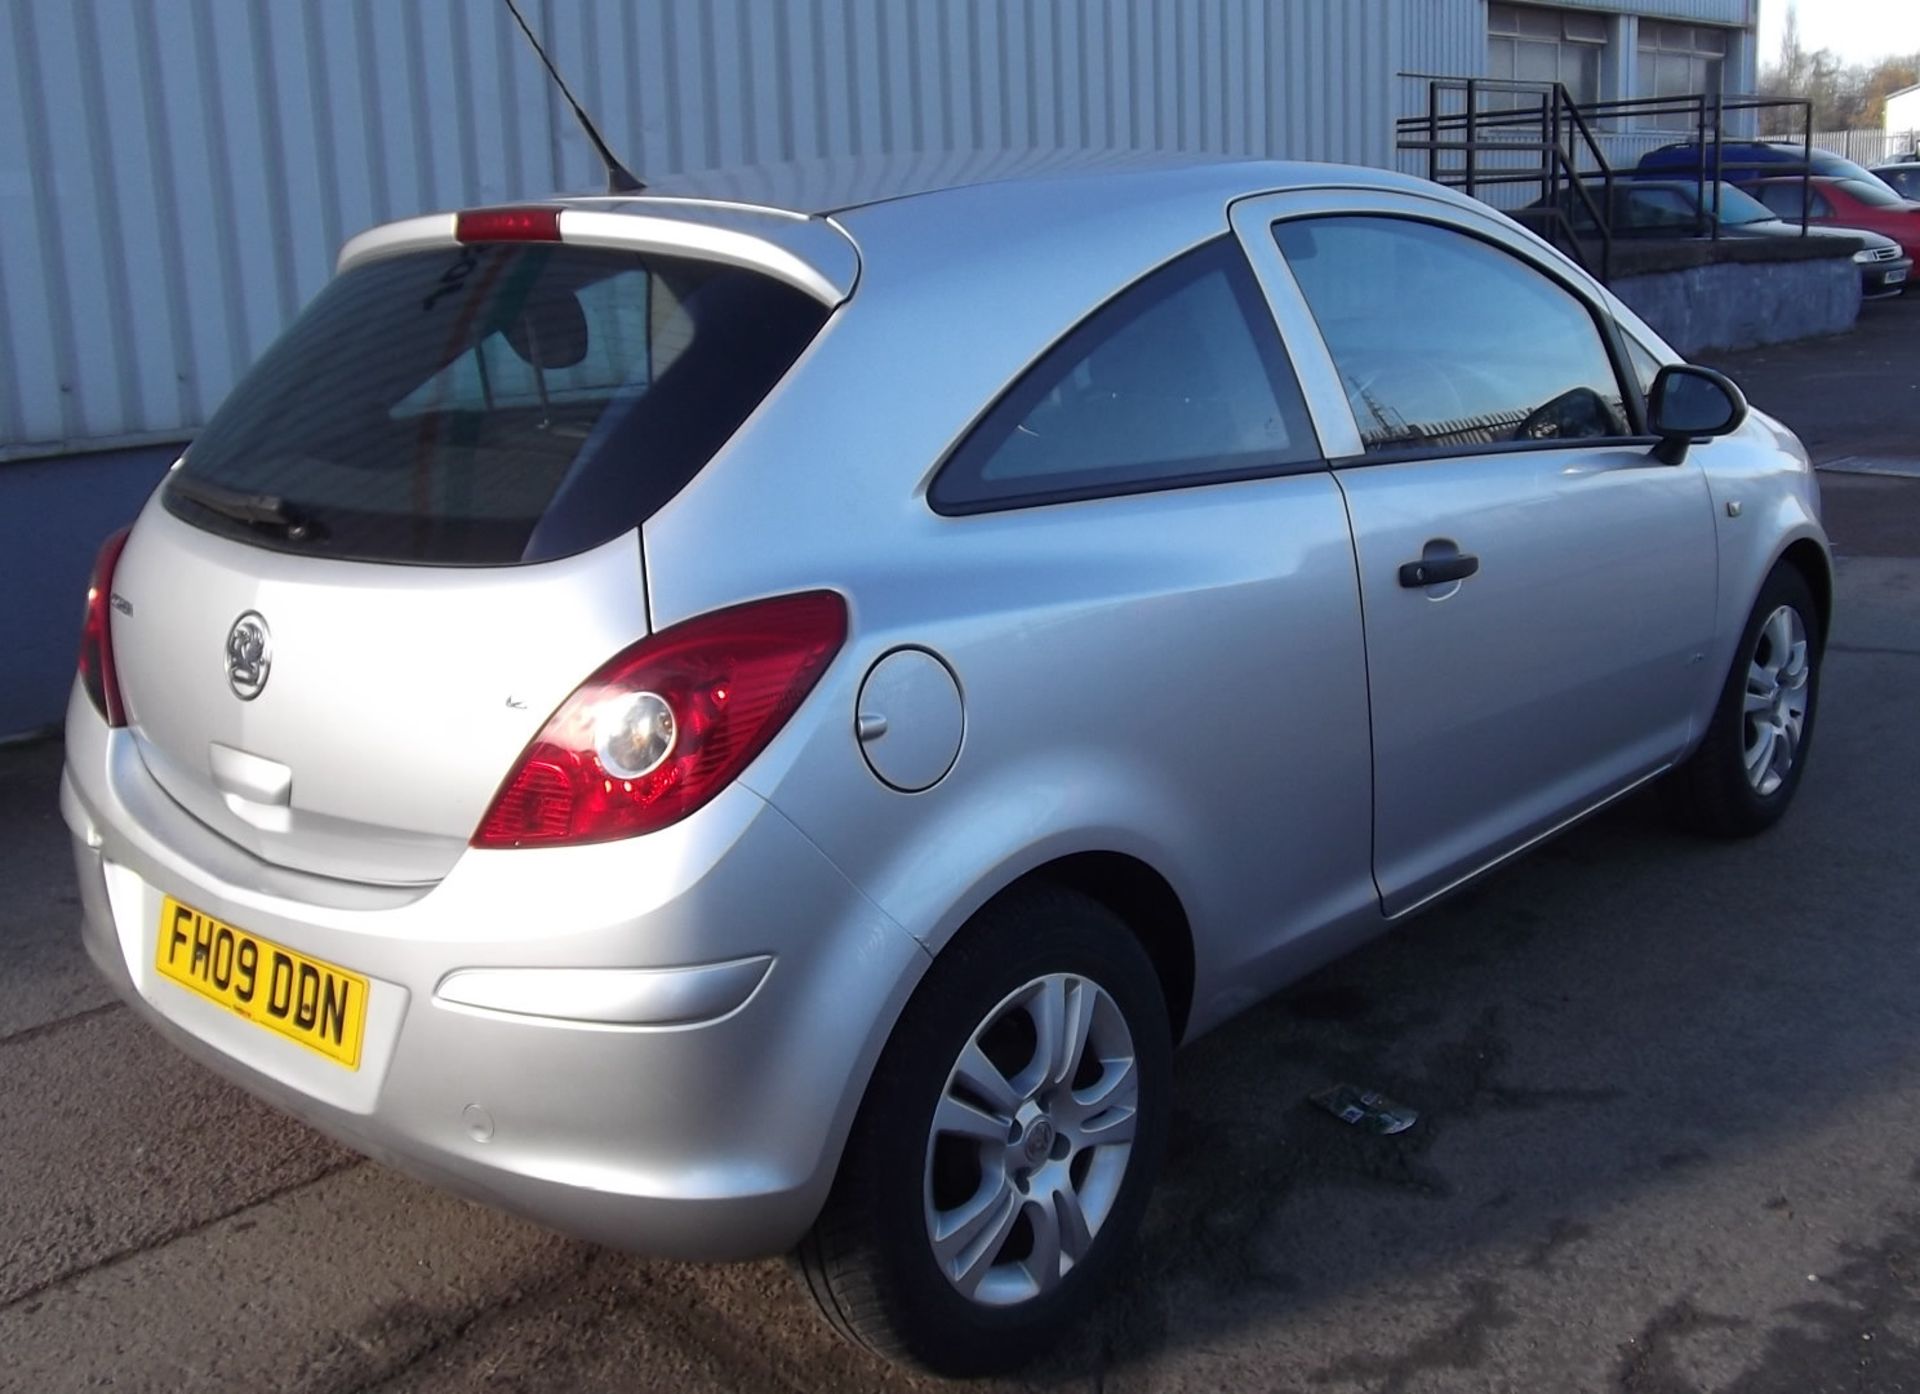 2009 Vauxhall Corsa 1.2 Active 3 Door Hatchback - CL505 - NO VAT ON THE HAMMER - Location: Corby, No - Image 5 of 13